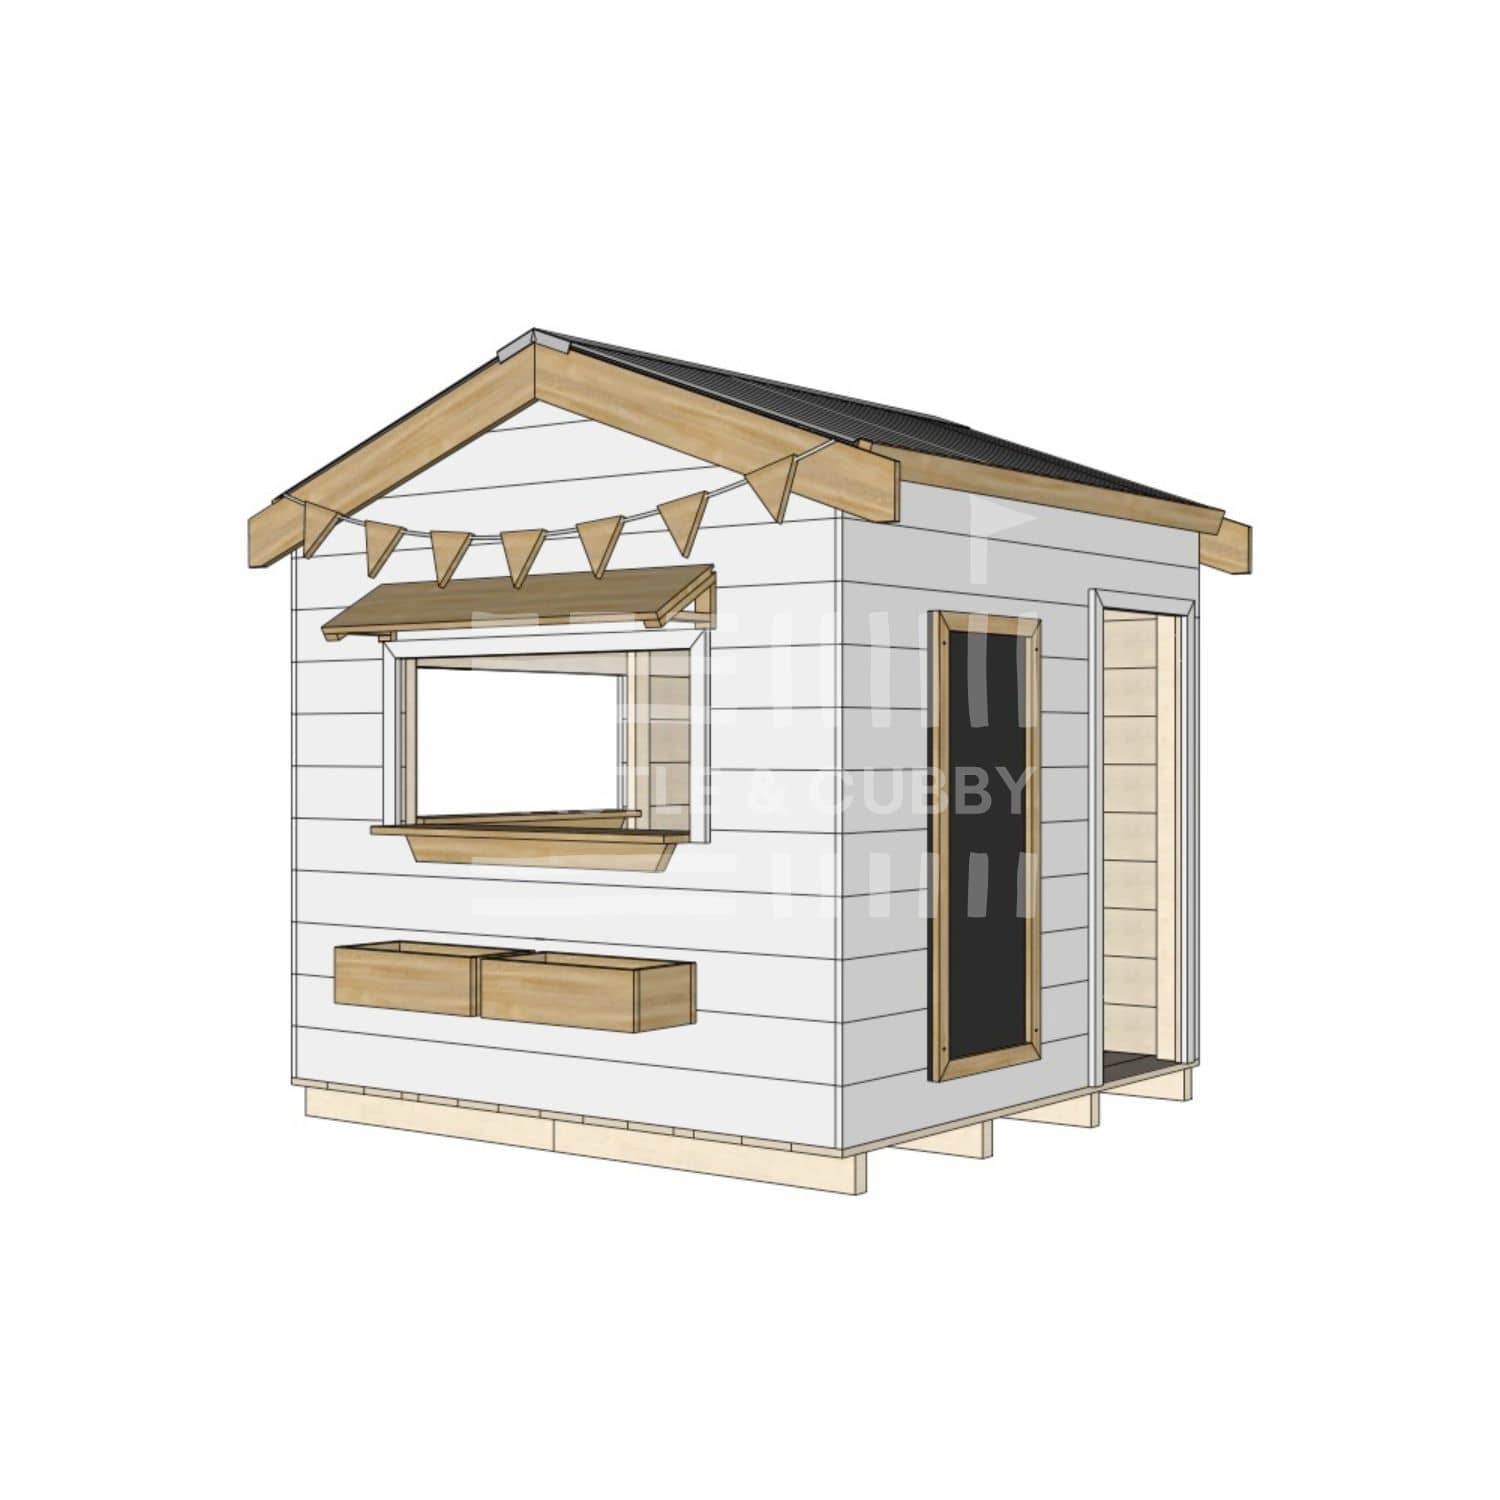 Pitched roof painted wooden cubby house commercial education midi square accessories